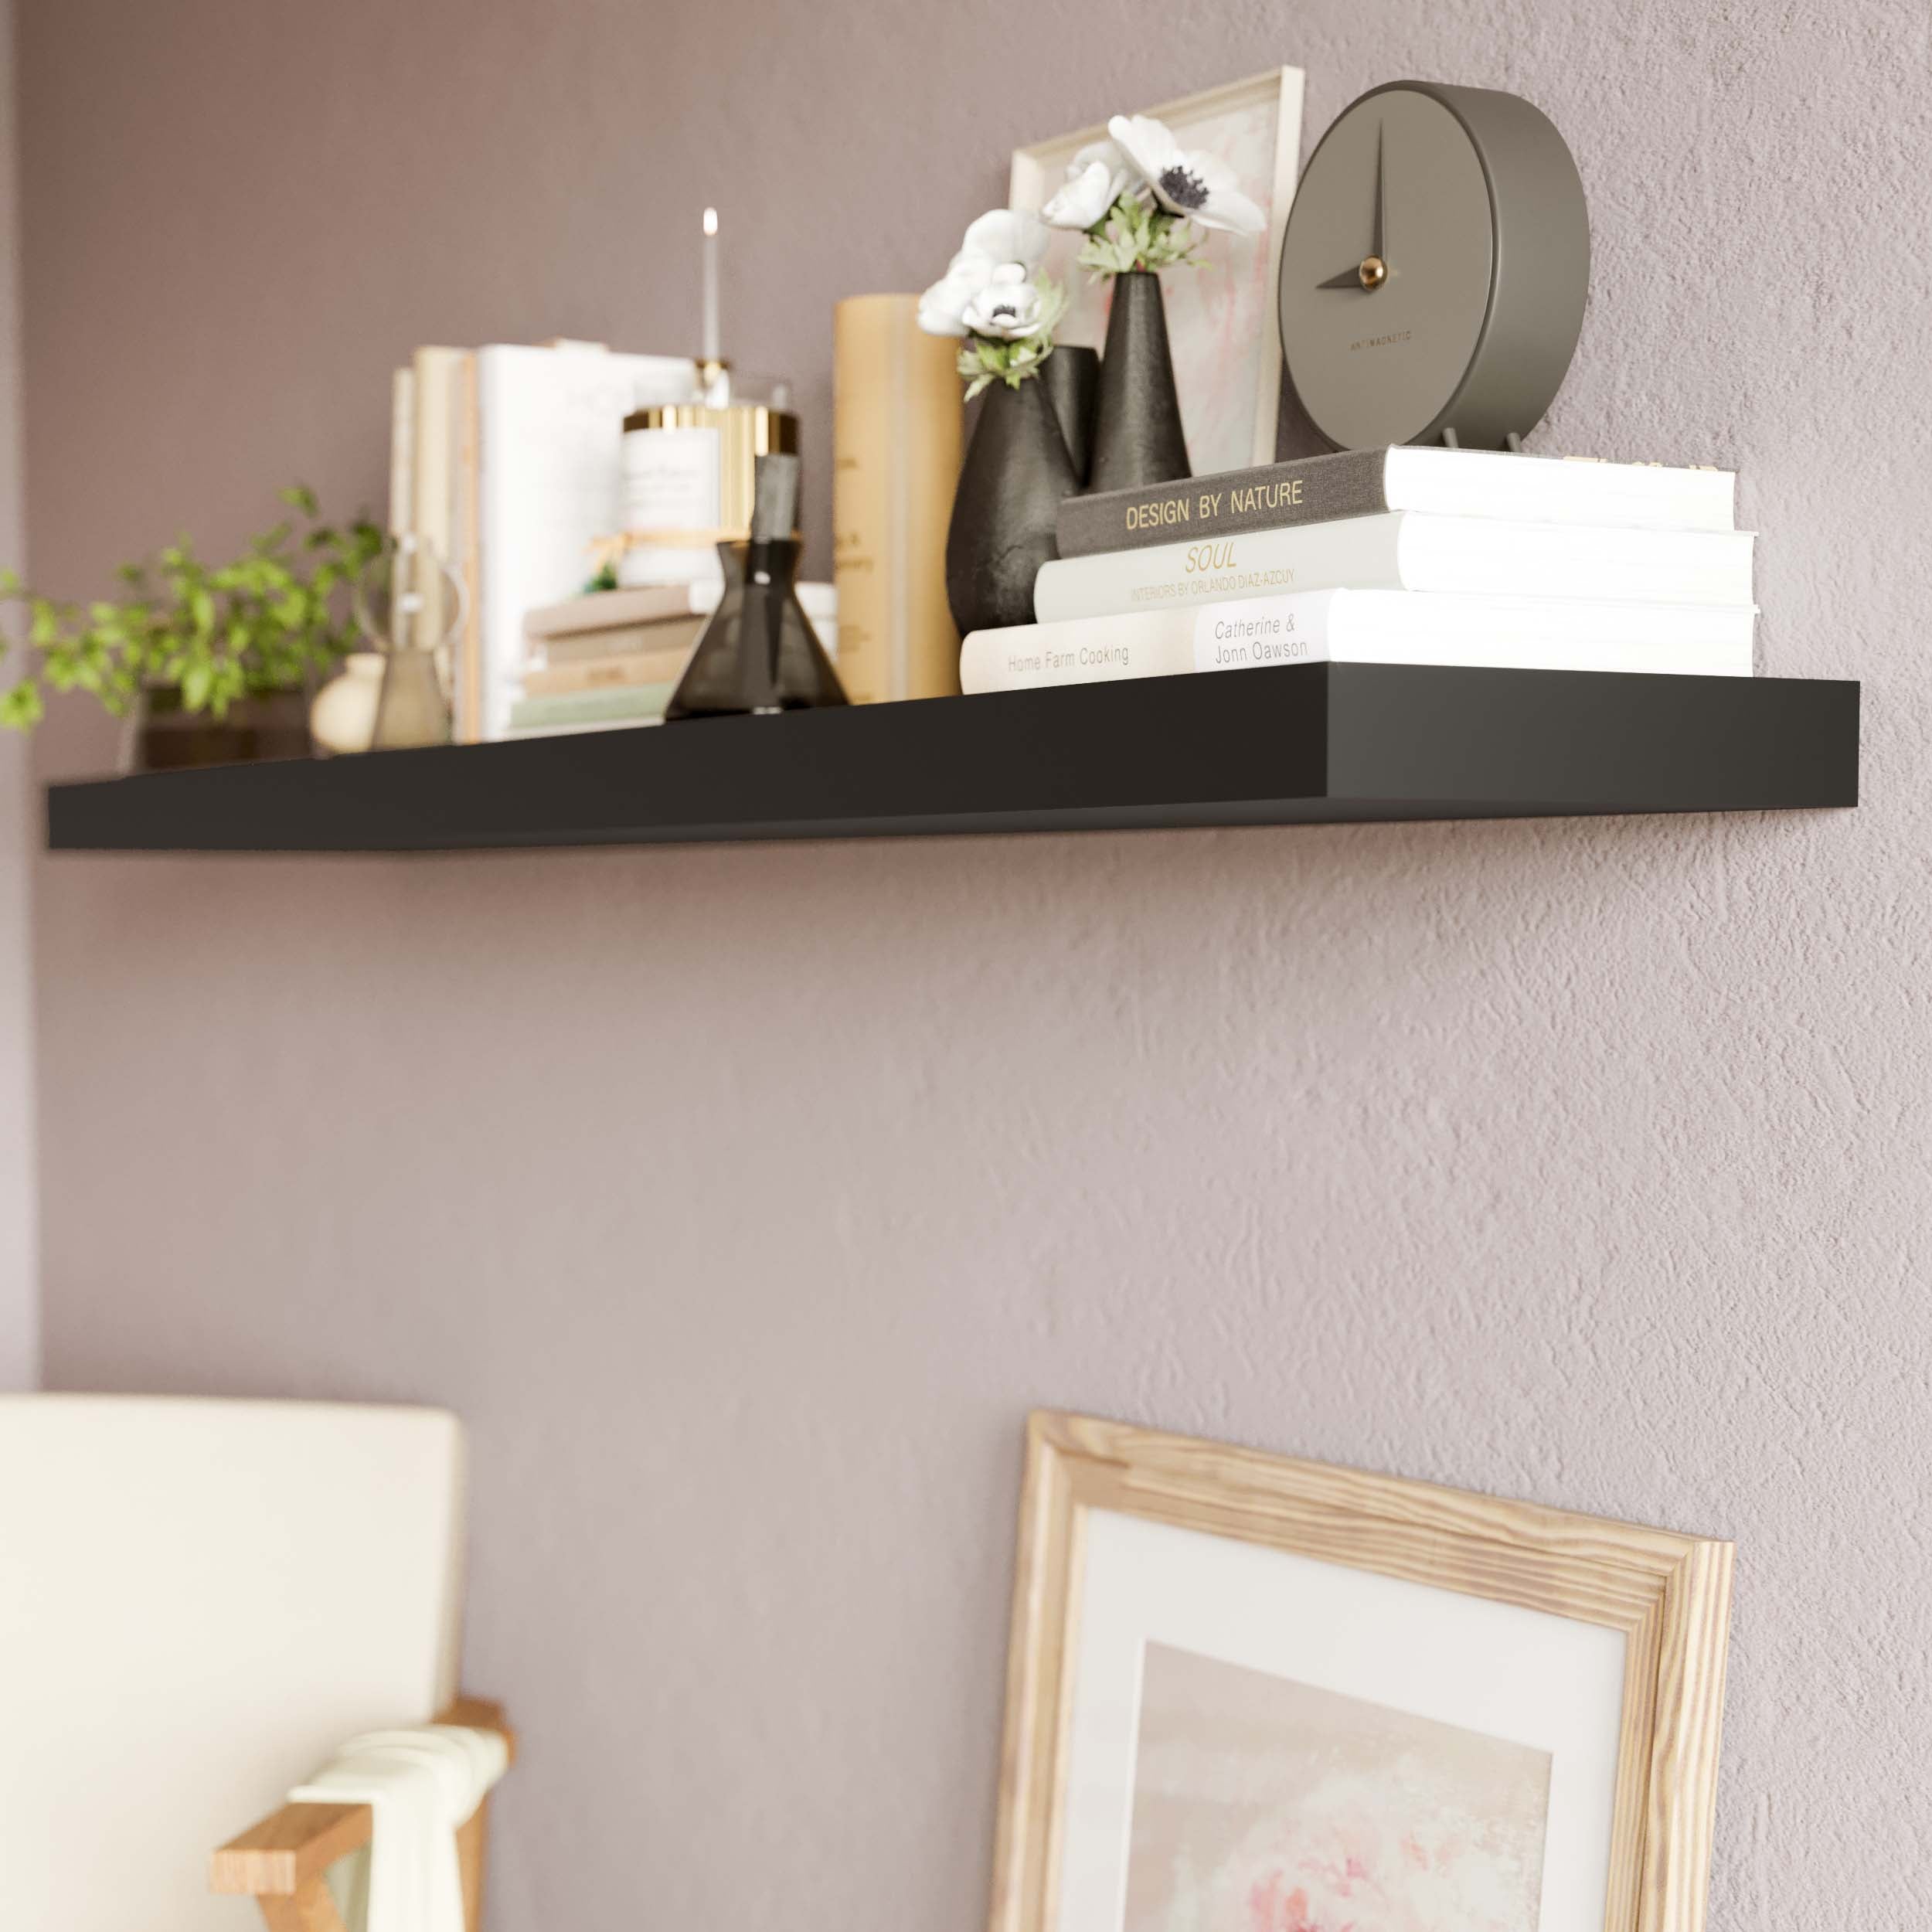 Black hanging shel in a cozy setting, adorned with books, vases, and a modern clock, adding a touch of sophistication.